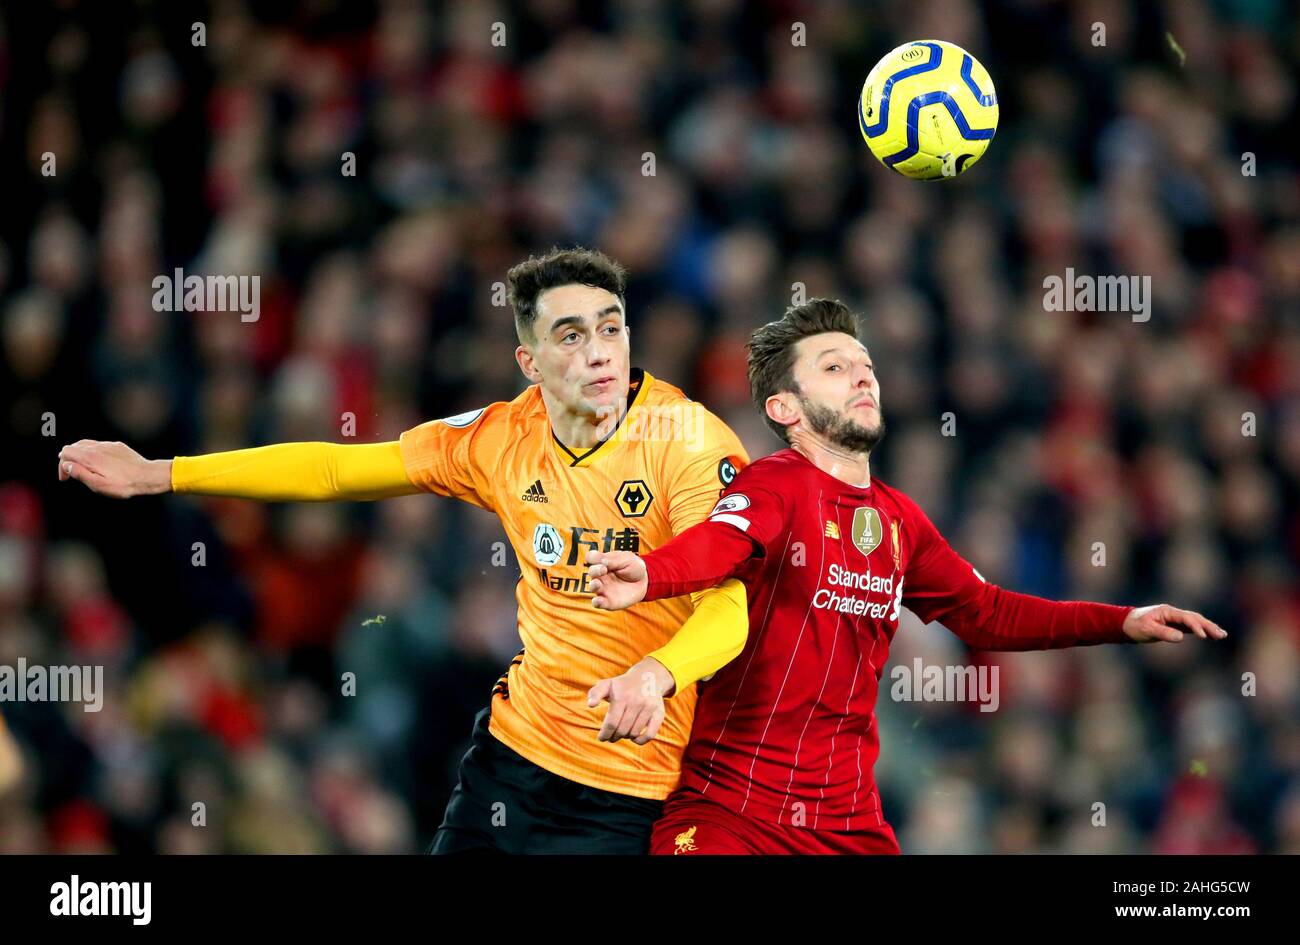 Liverpool's Sadio Mane's shot hits off the shoulder of Liverpool's Adam Lallana (right) and into the net resulting in their sides first goal of the game during the Premier League match at Anfield Stadium, Liverpool. Stock Photo